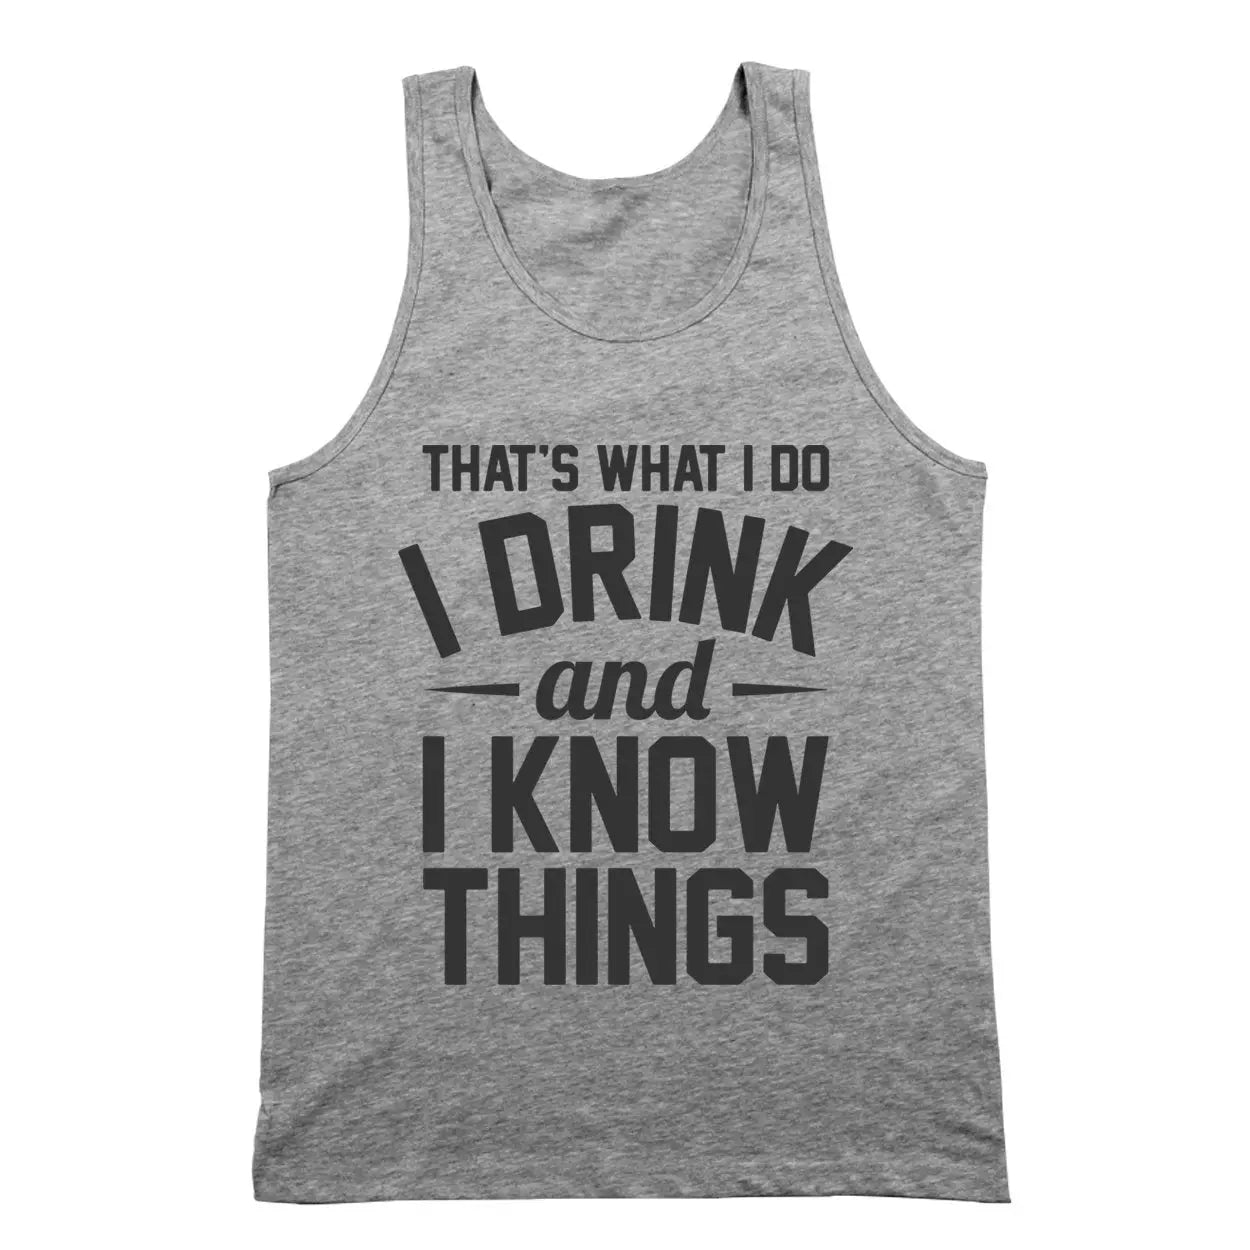 I Drink And I Know Things Tshirt - Donkey Tees